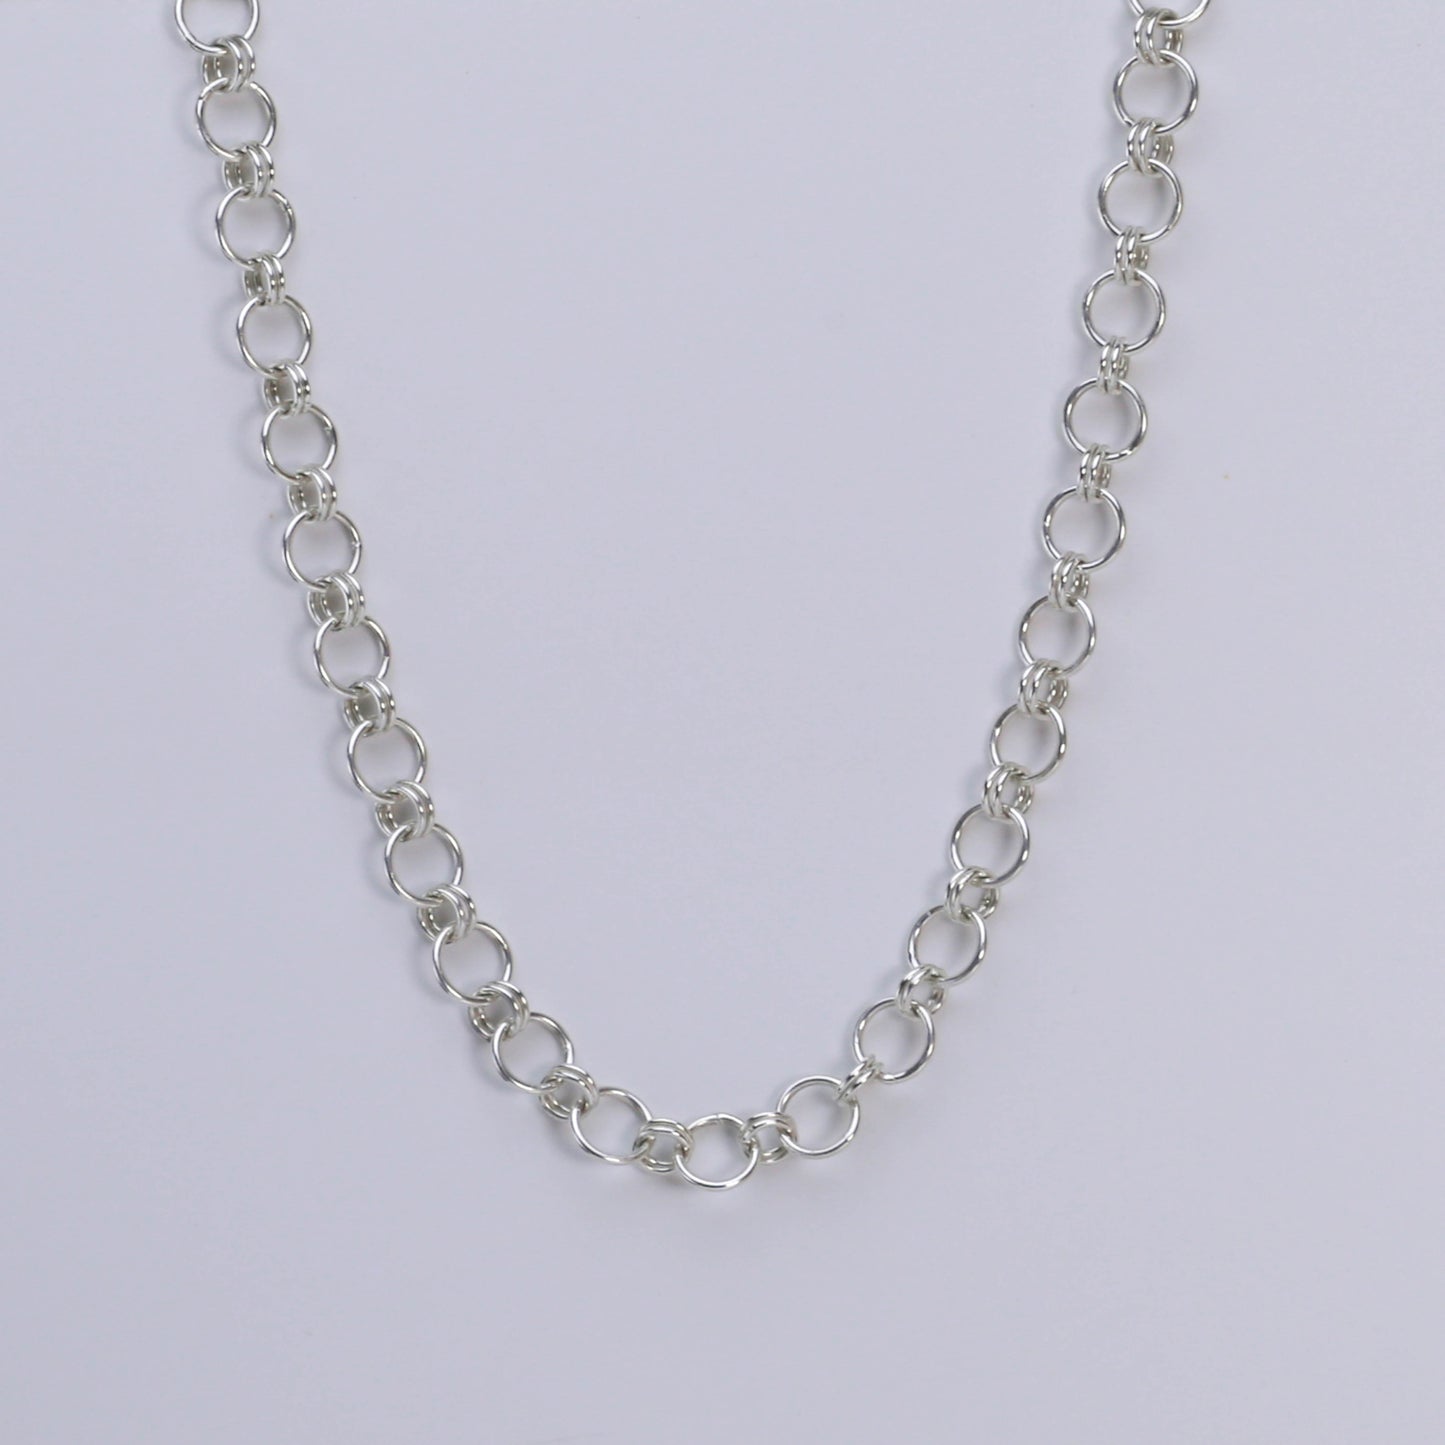 HOOPLA CHAIN NECKLACE